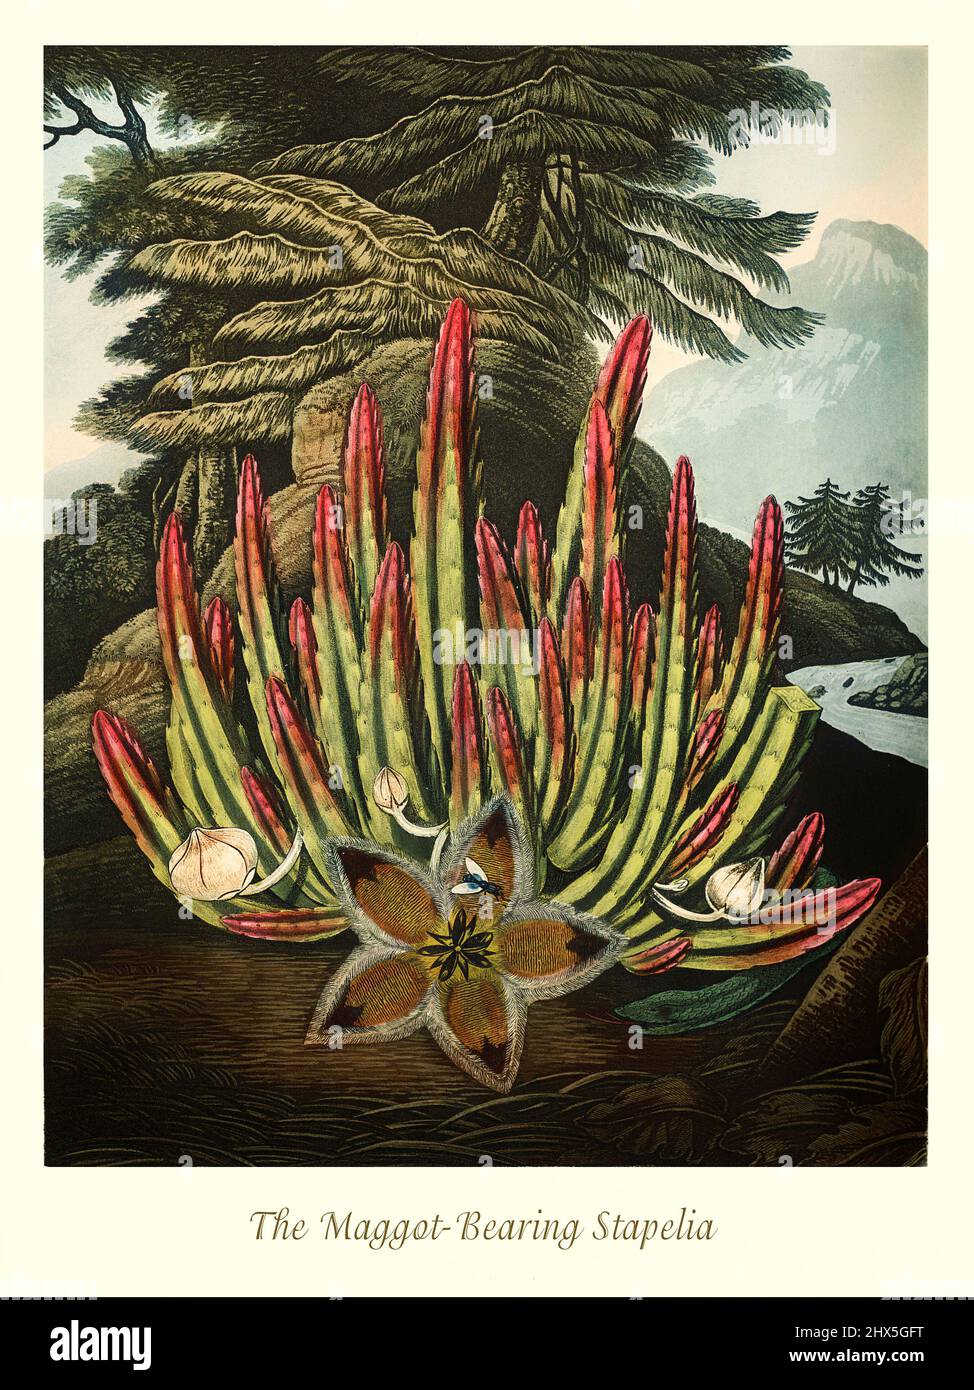 An early 19th century illustration of the Maggot Bearing Stapelia, a  genus of low-growing, spineless, stem succulent plants, predominantly from South Africa with a few from other parts of Africa. The appearance of many Stapelia flowers has been claimed to resemble rotting meat, and coupled with their odour serve to attract blow flies that frequently lay eggs around the coronae of Stapelia flowers. This artwork for Robert John Thornton's 'The Temple of Flora' in 1807, was printed, for the publisher, by T. Bensley, London, England. Stock Photo